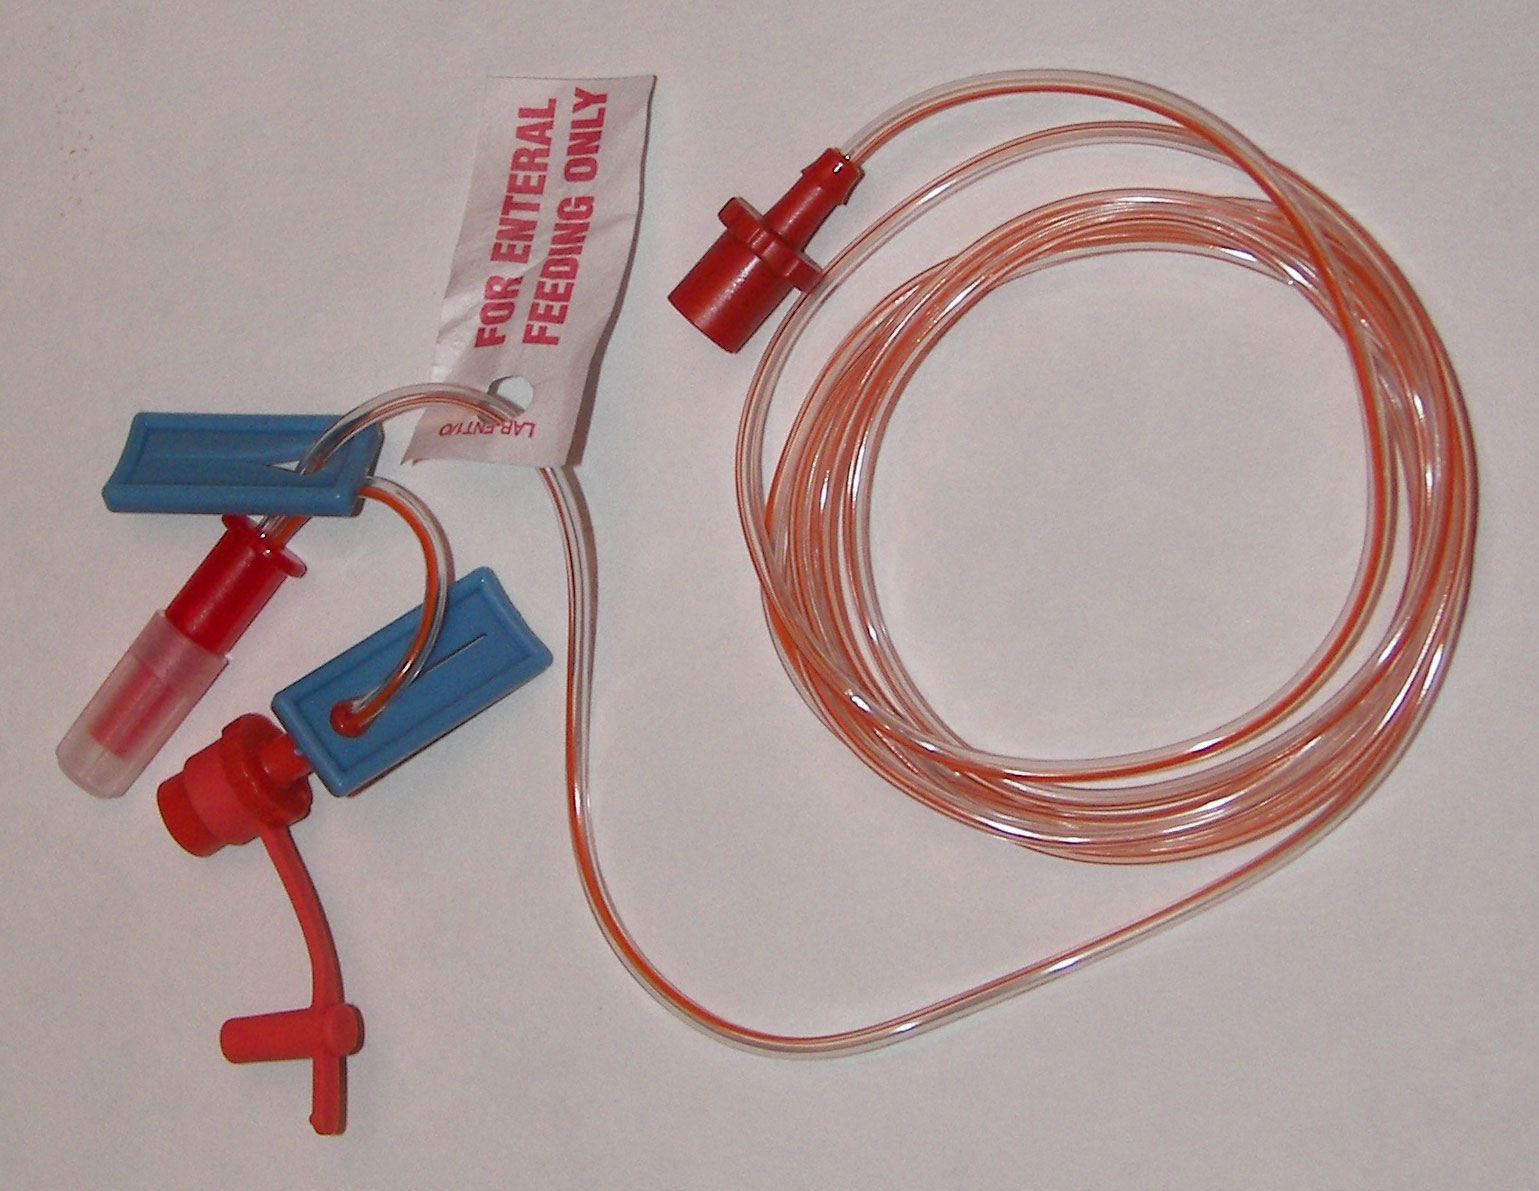 60" Bifurcated Enteral Only Extension Set